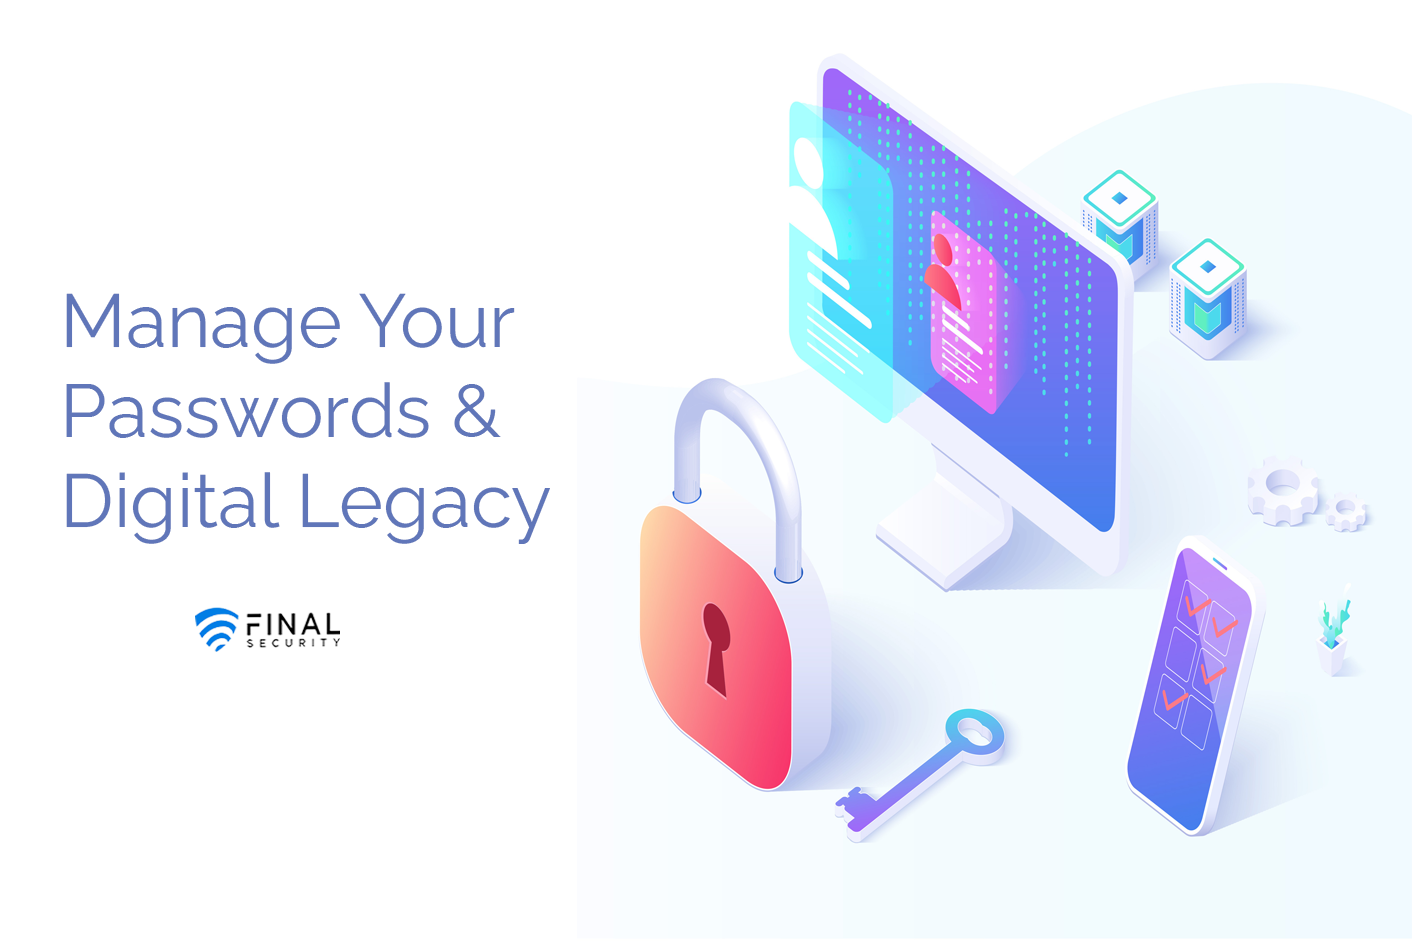 Passwords, Password Manager,  Digital Legacy Passwords, Digital Legacy, Digital Estate, Digital Legacy Planning, Digital Estate Planning, Info Vault, Digital Death, Your Legacy, Legacy Planning, Estate Planning, Financial Planning